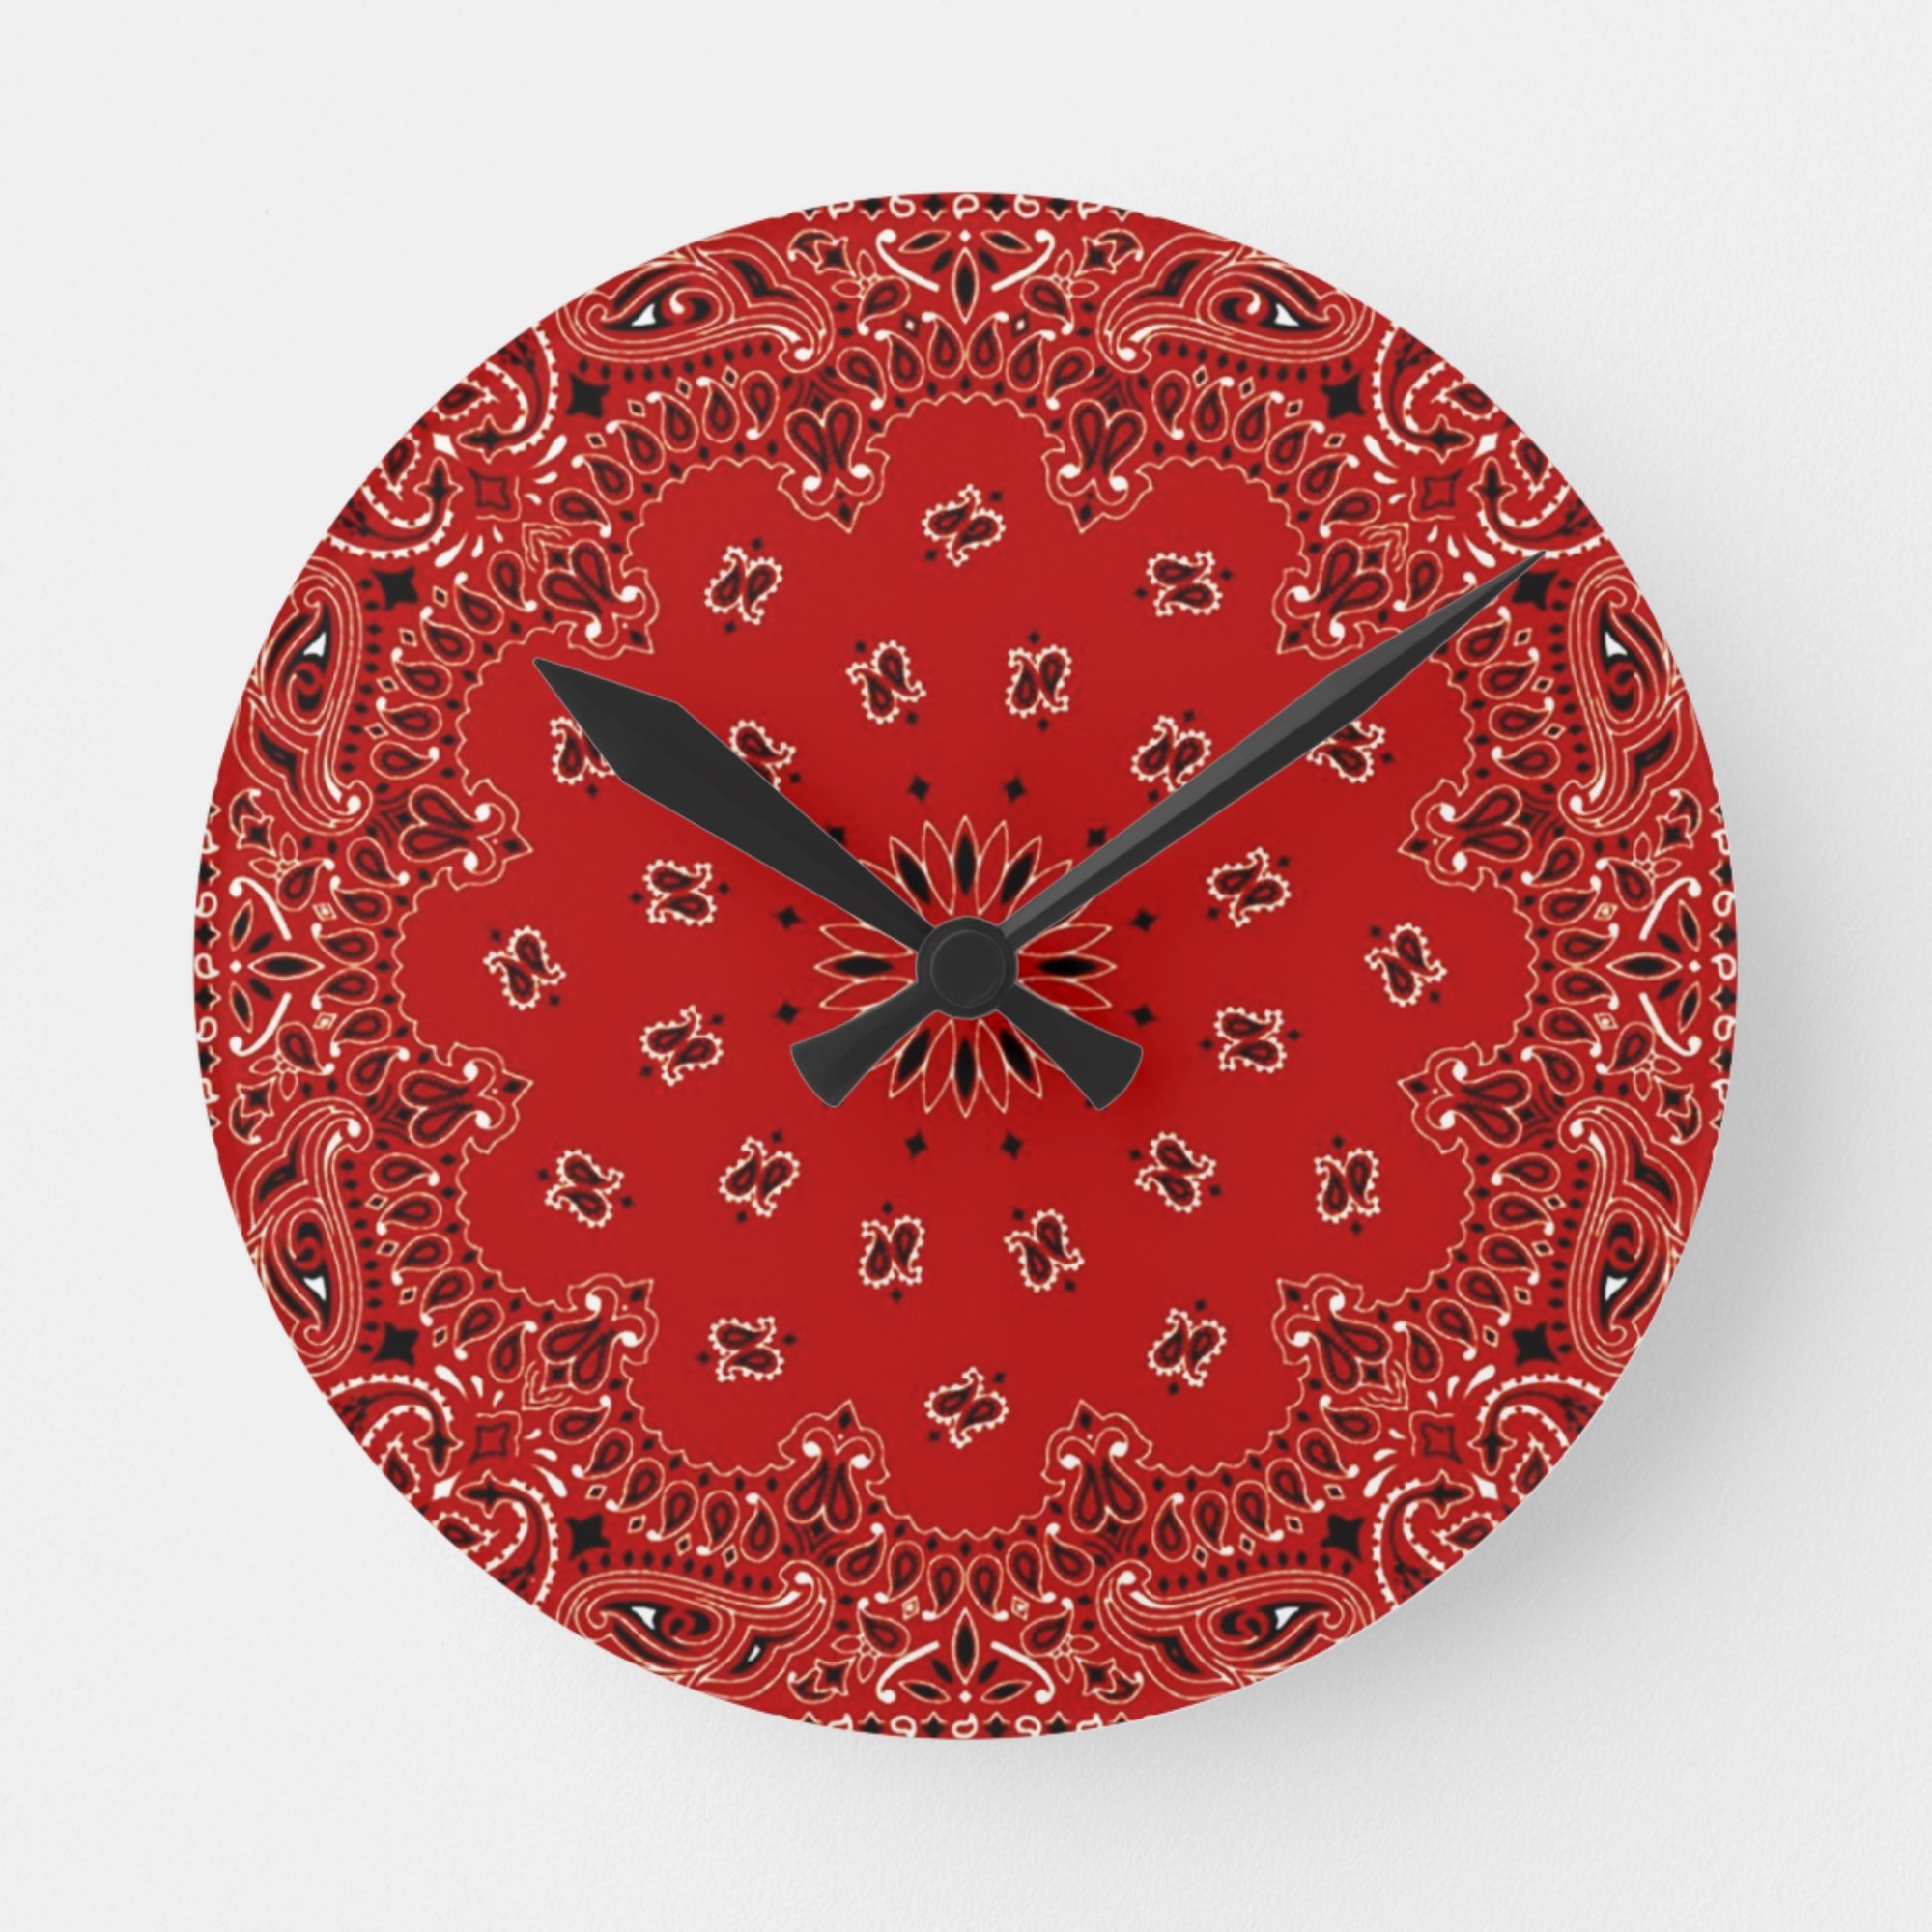 This image released by Zazzle shows a wall clock that features a bandana print. (Zazzle via AP)